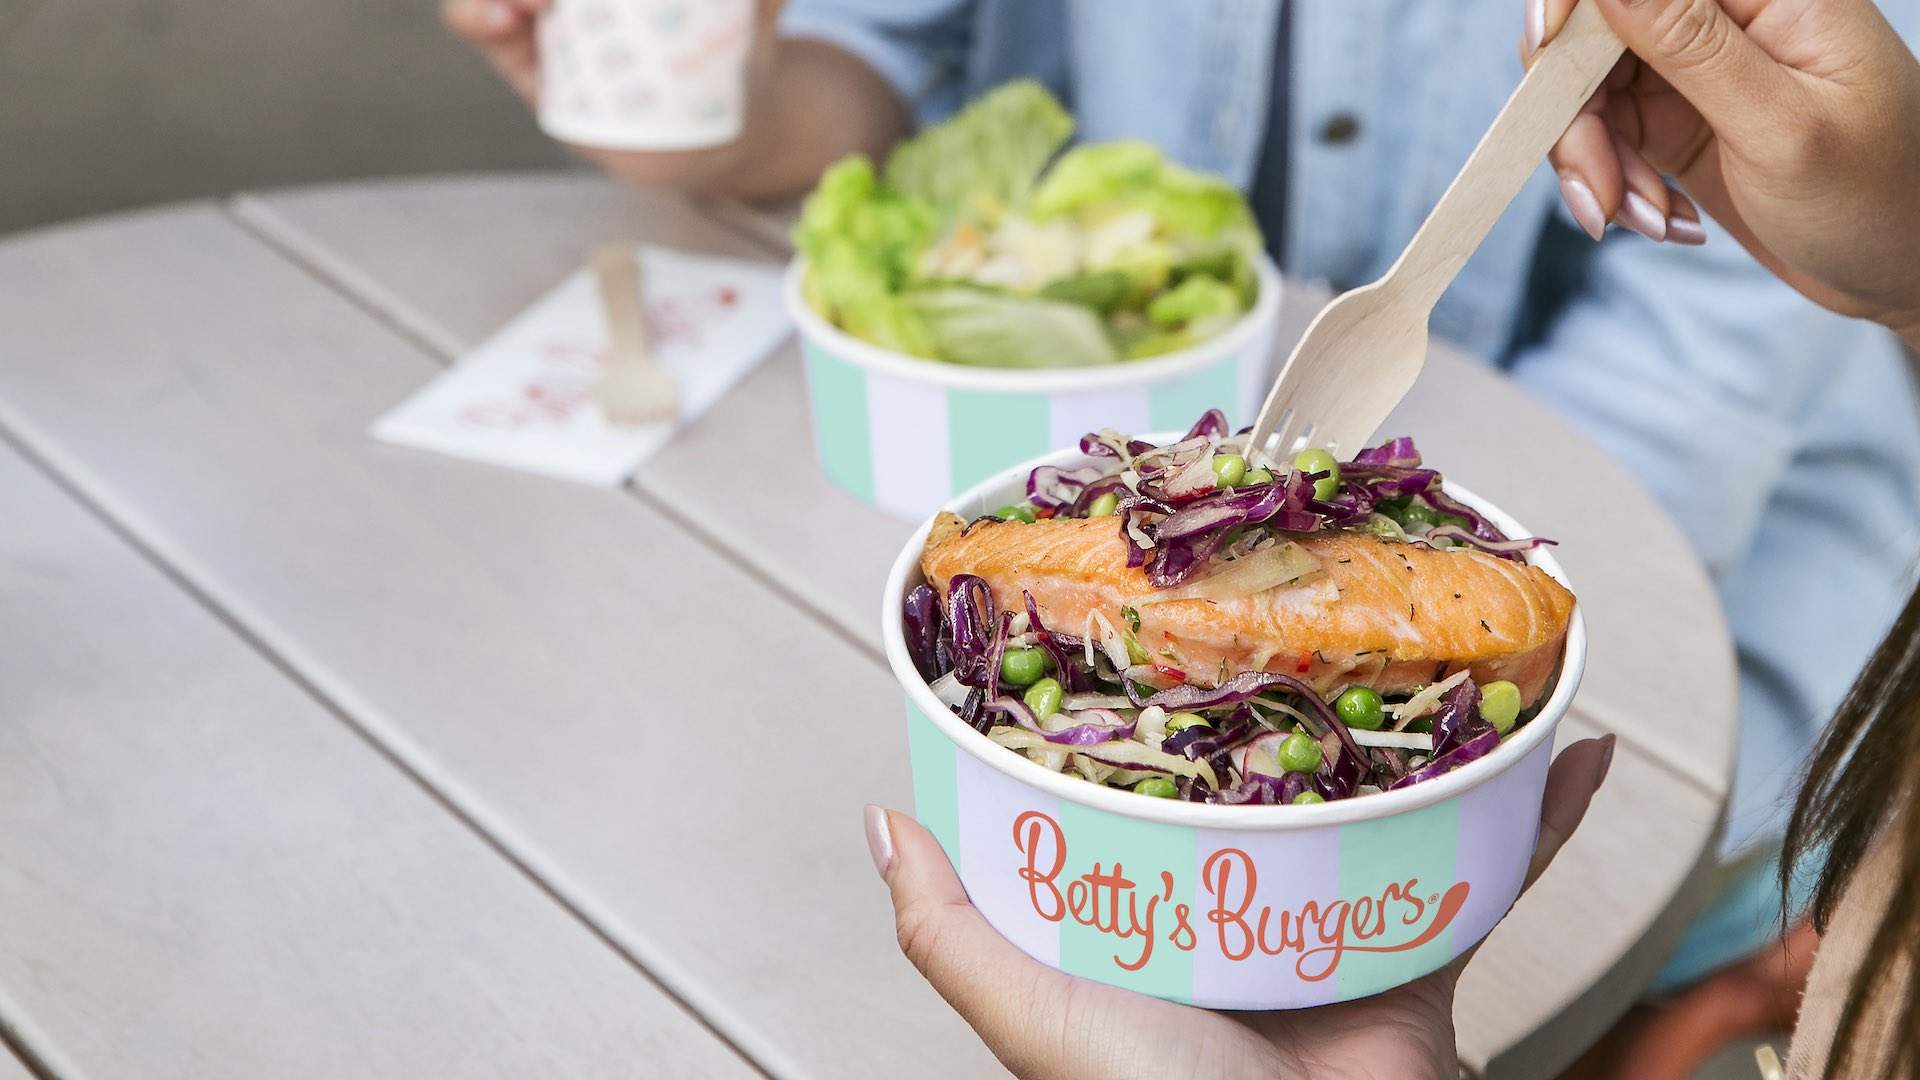 You Can Now Get Nourishing Bowls at Betty's Burgers